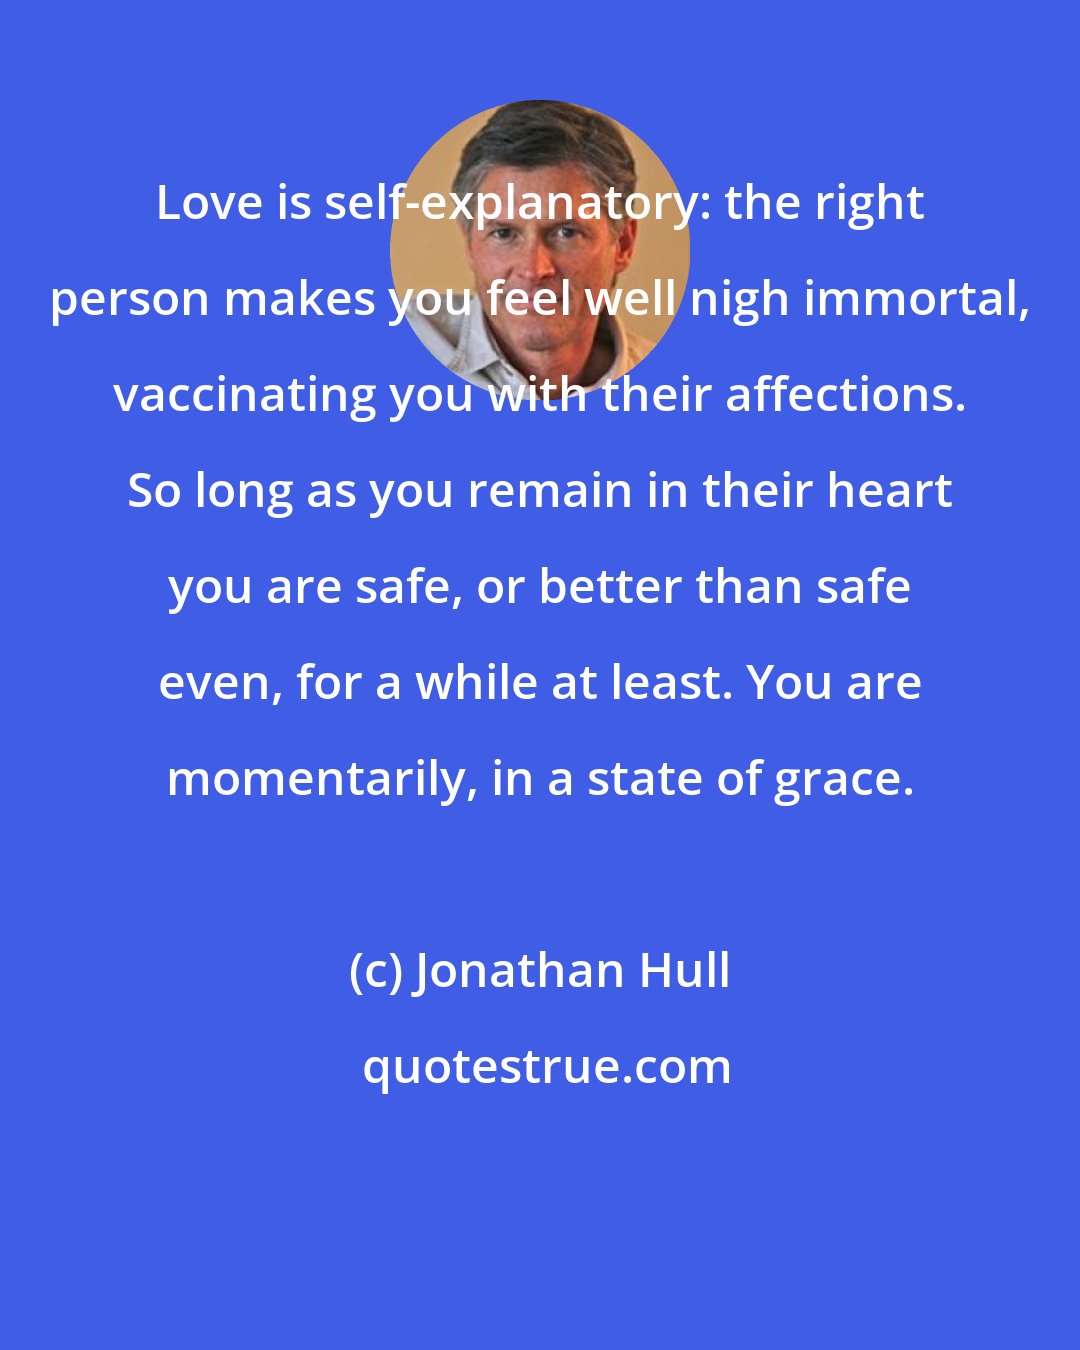 Jonathan Hull: Love is self-explanatory: the right person makes you feel well nigh immortal, vaccinating you with their affections. So long as you remain in their heart you are safe, or better than safe even, for a while at least. You are momentarily, in a state of grace.